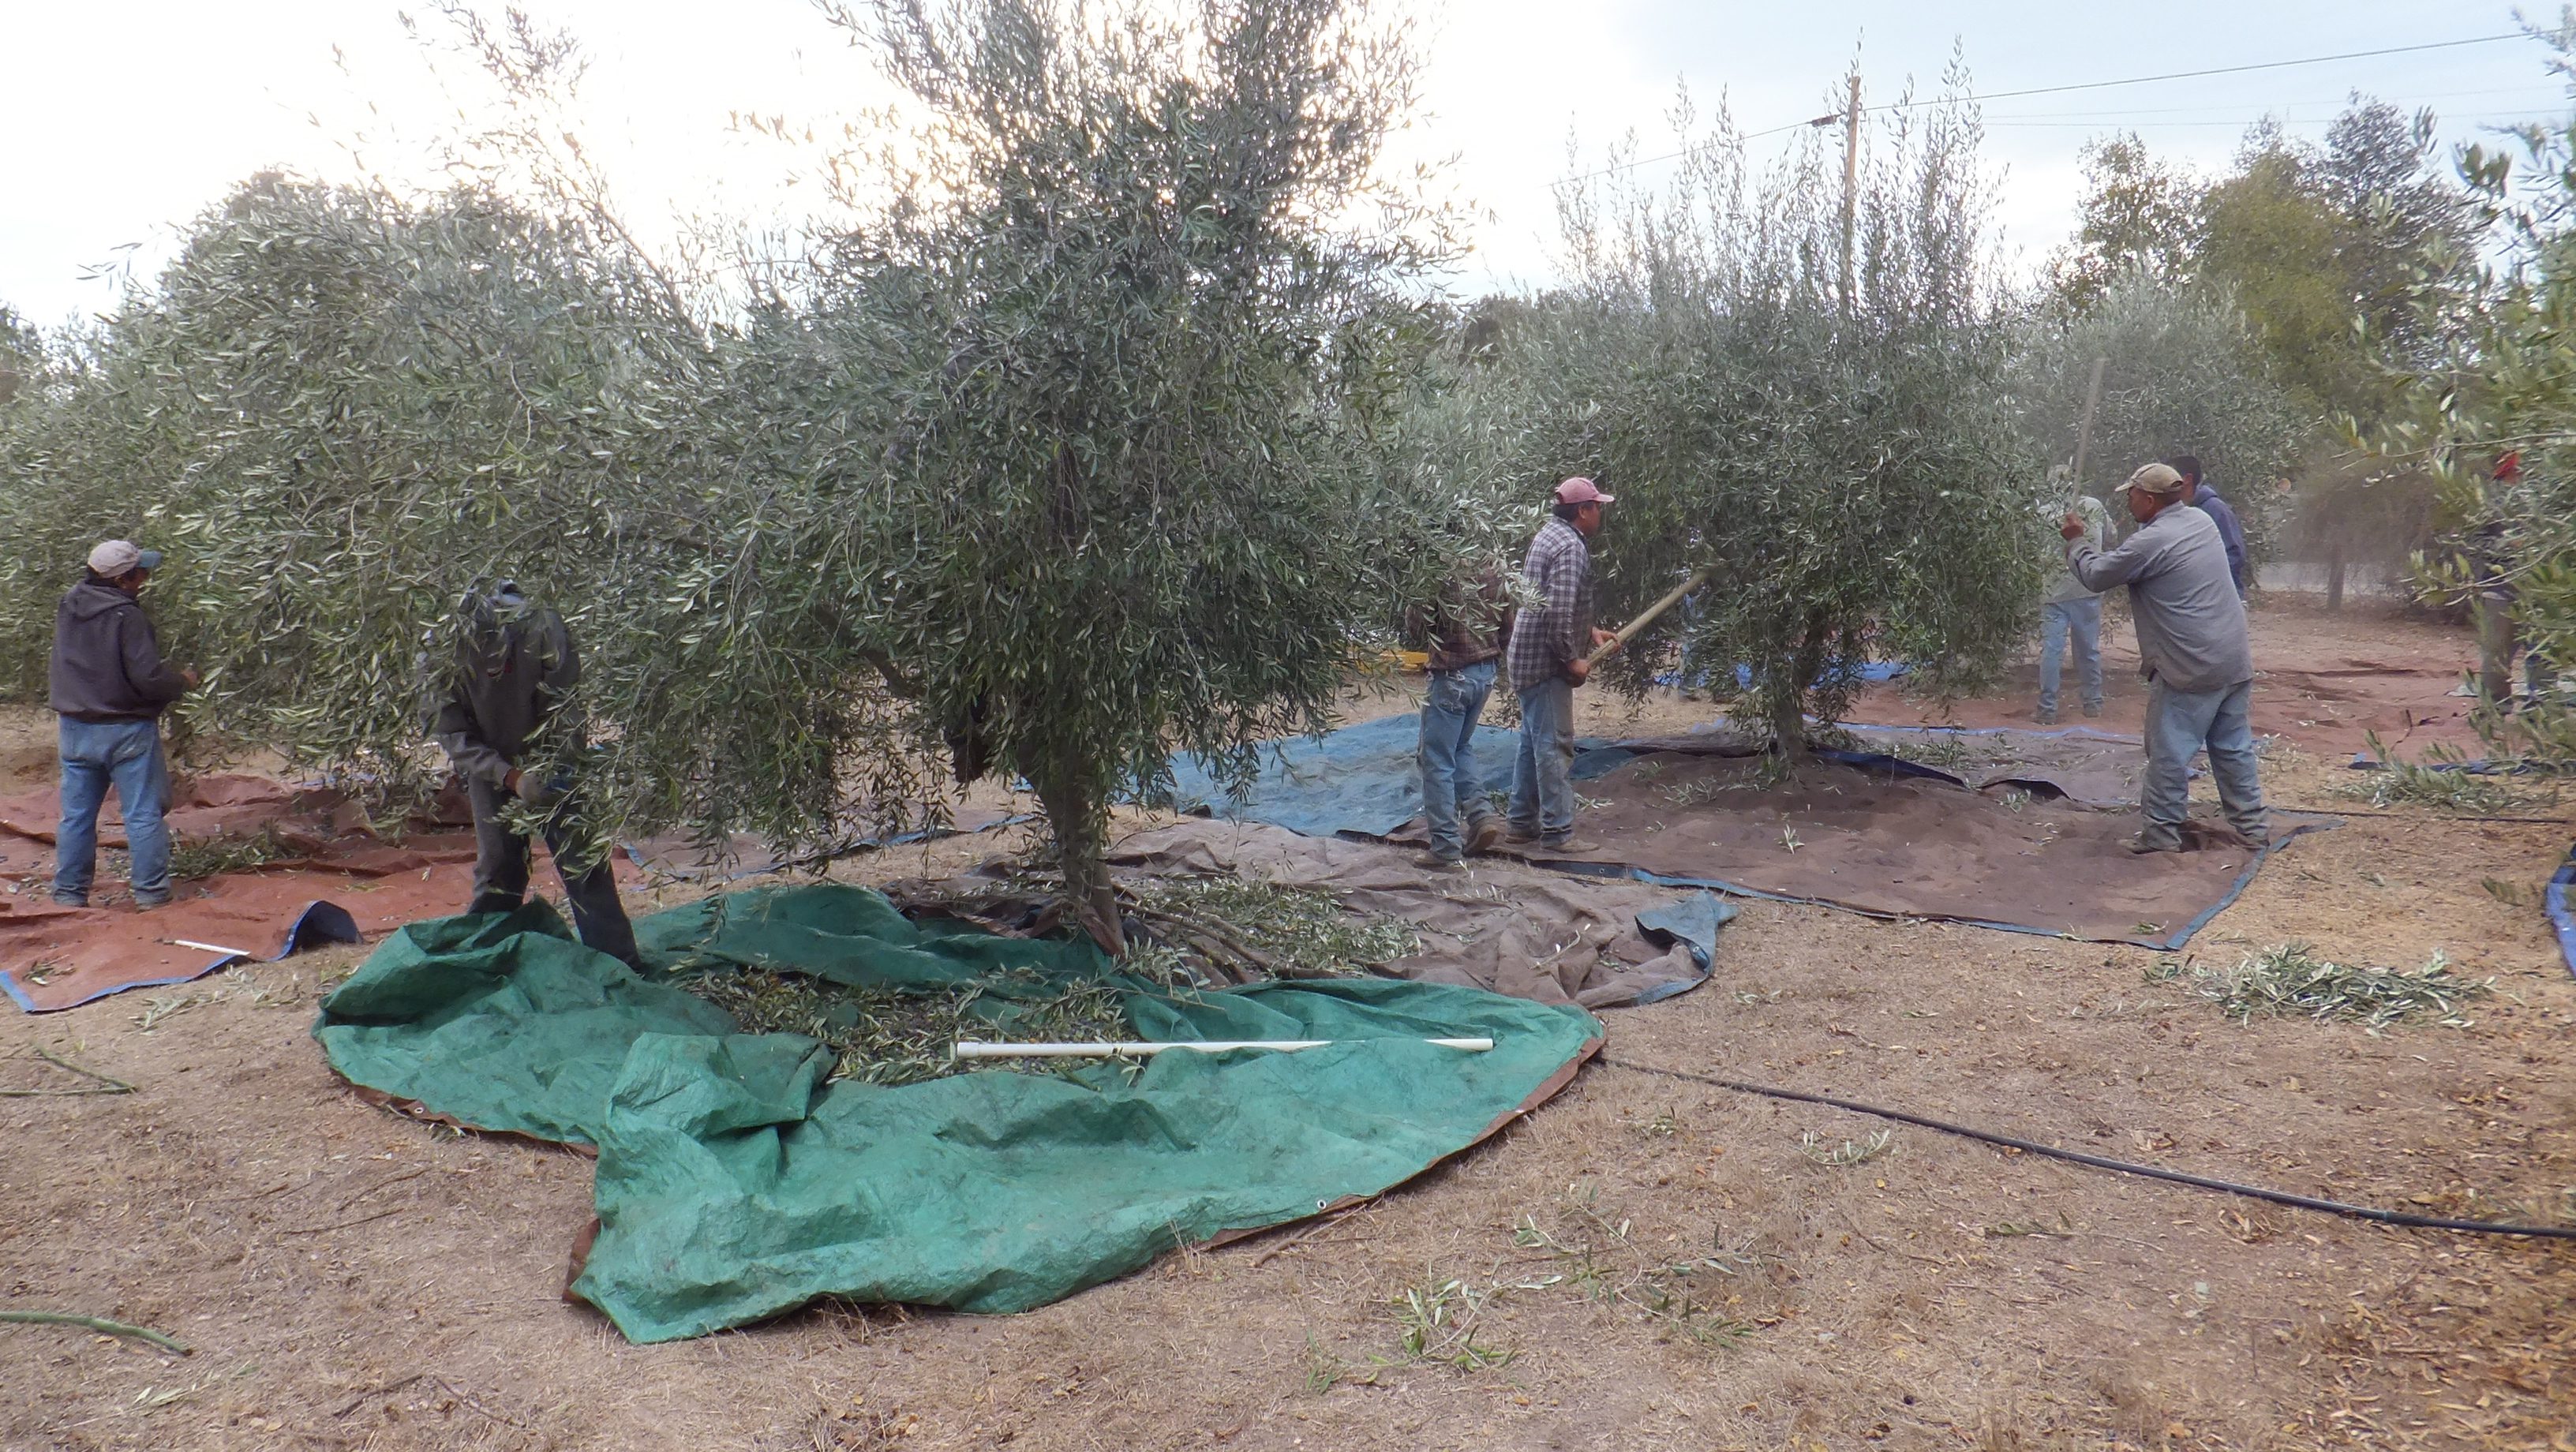 Local olive growers say mechanization isn’t fruitful